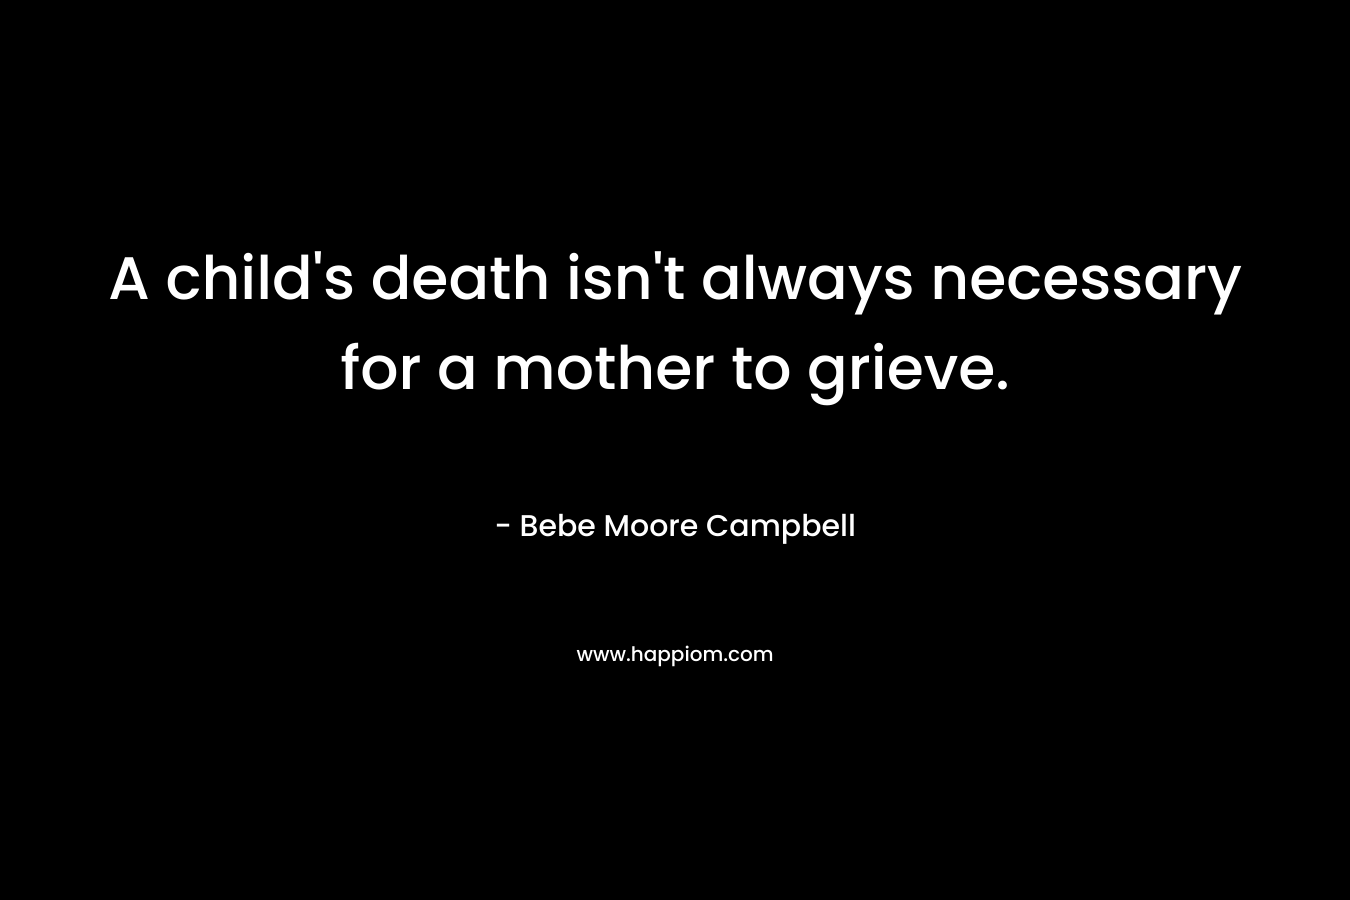 A child's death isn't always necessary for a mother to grieve.